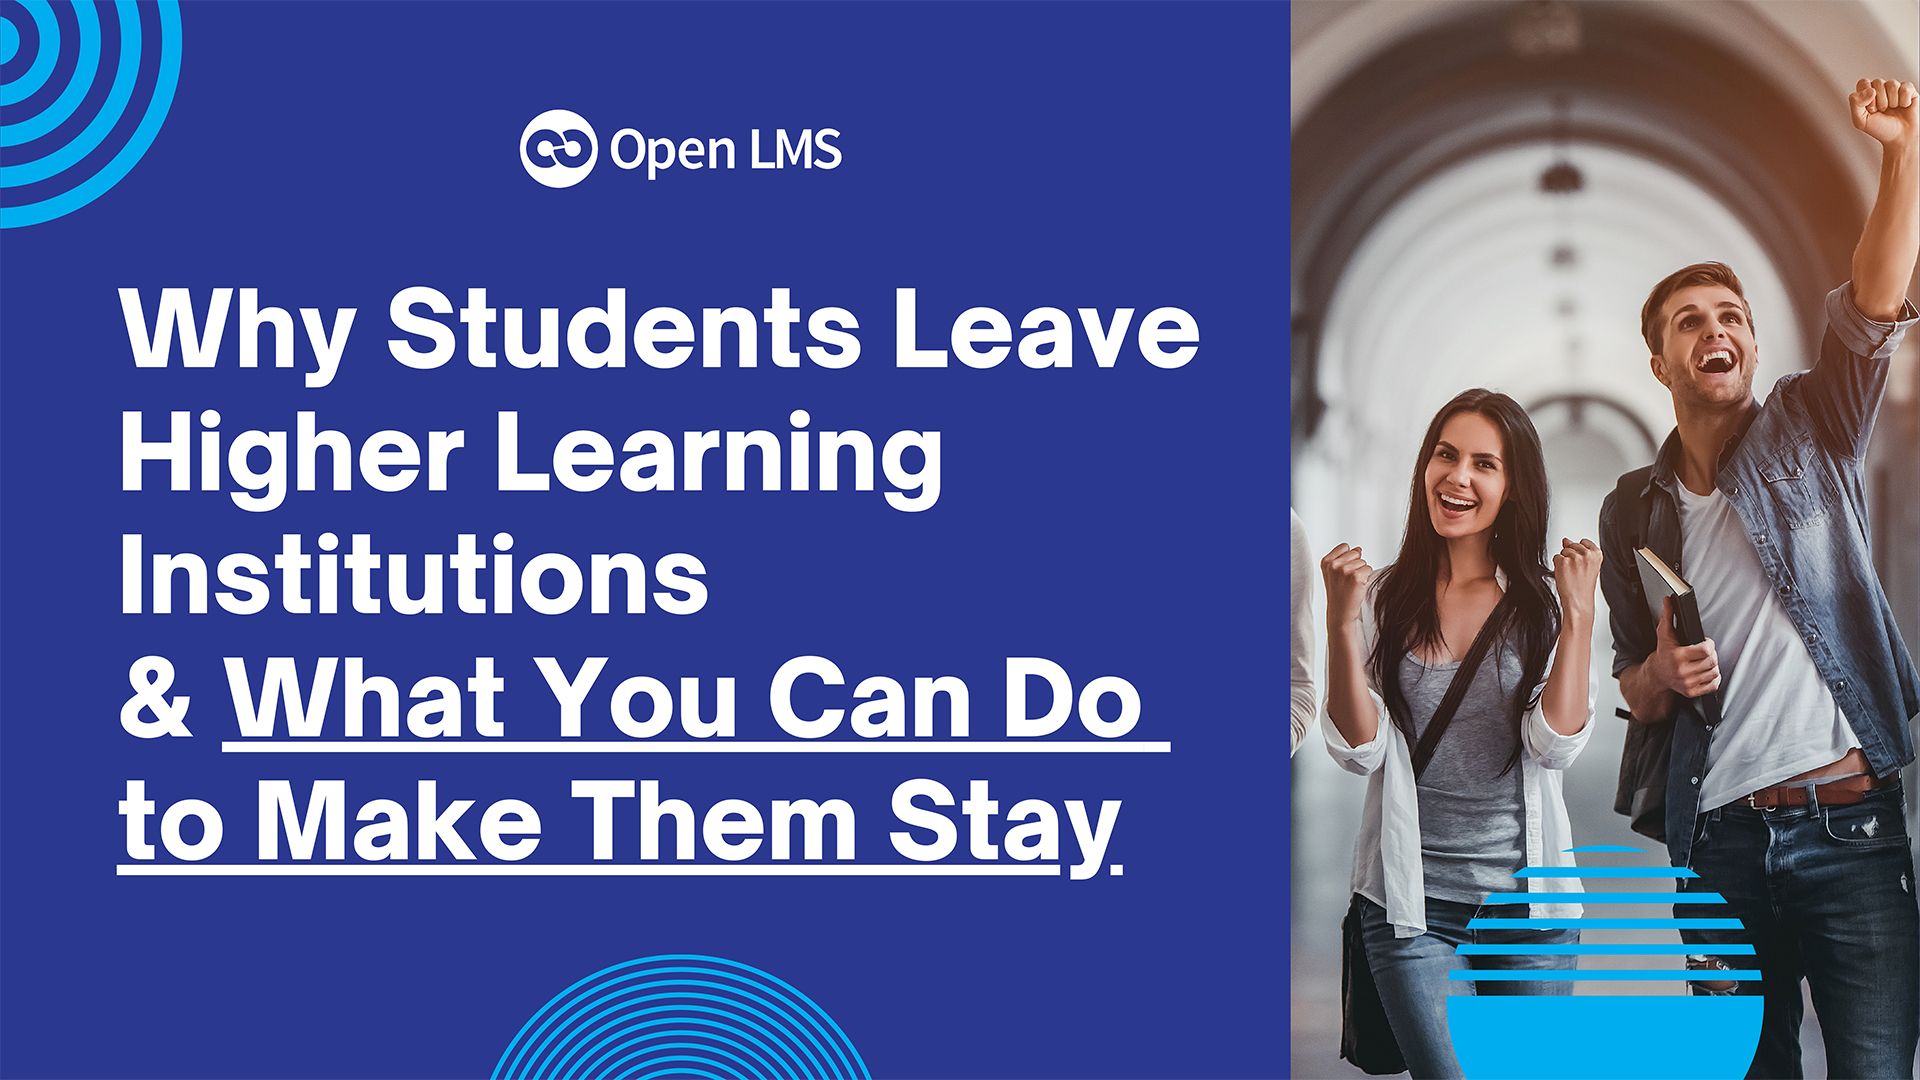 Why Students Leave Higher Learning Institutions, and What You Can Do to Make Them Stay